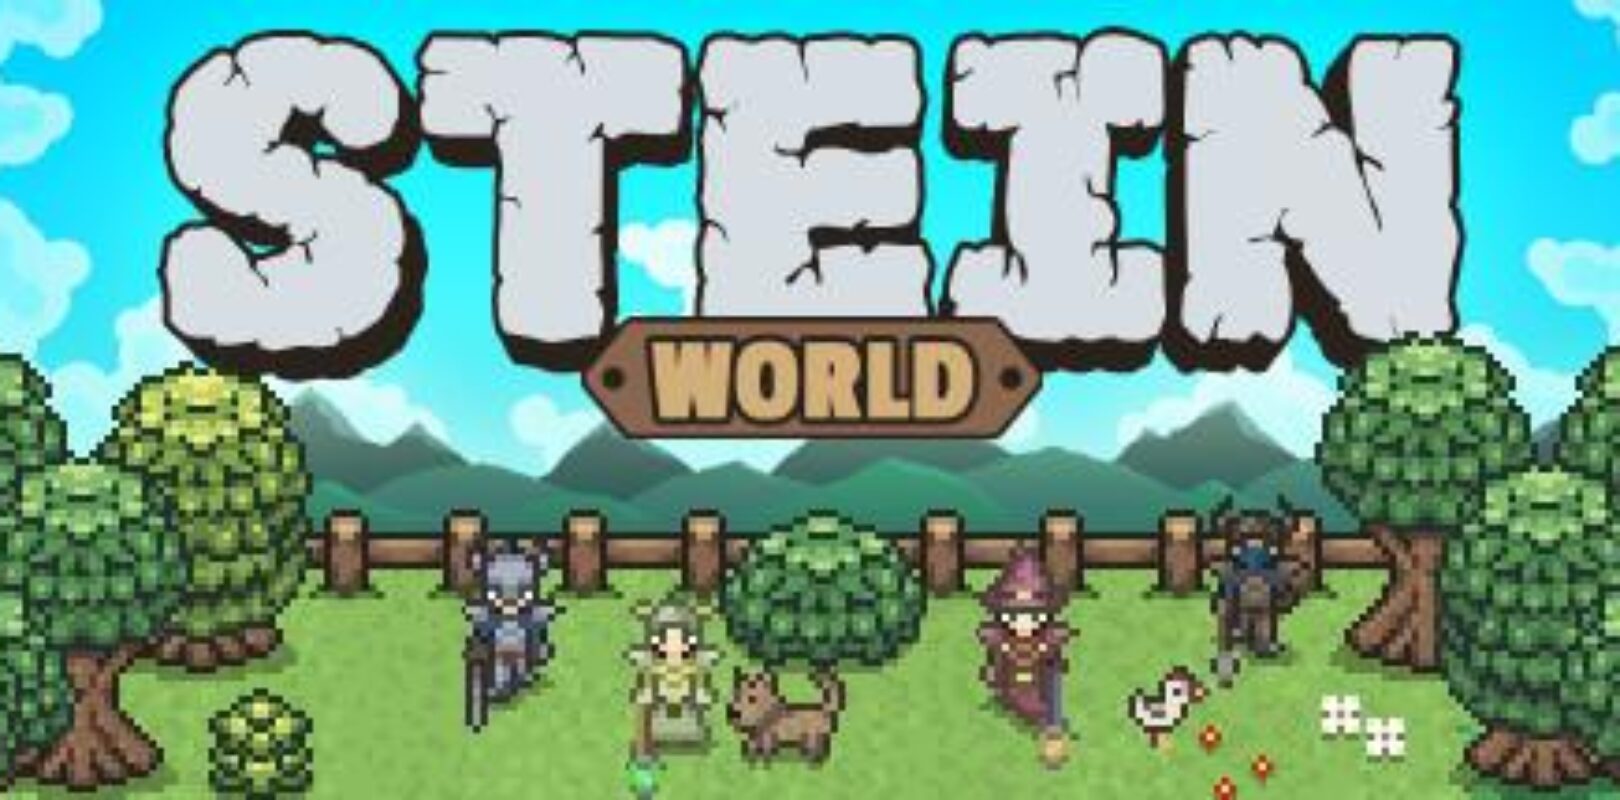 Stein World Gift Pack Key Code Giveaway Ended Pivotal Gamers - roblox keycode enter